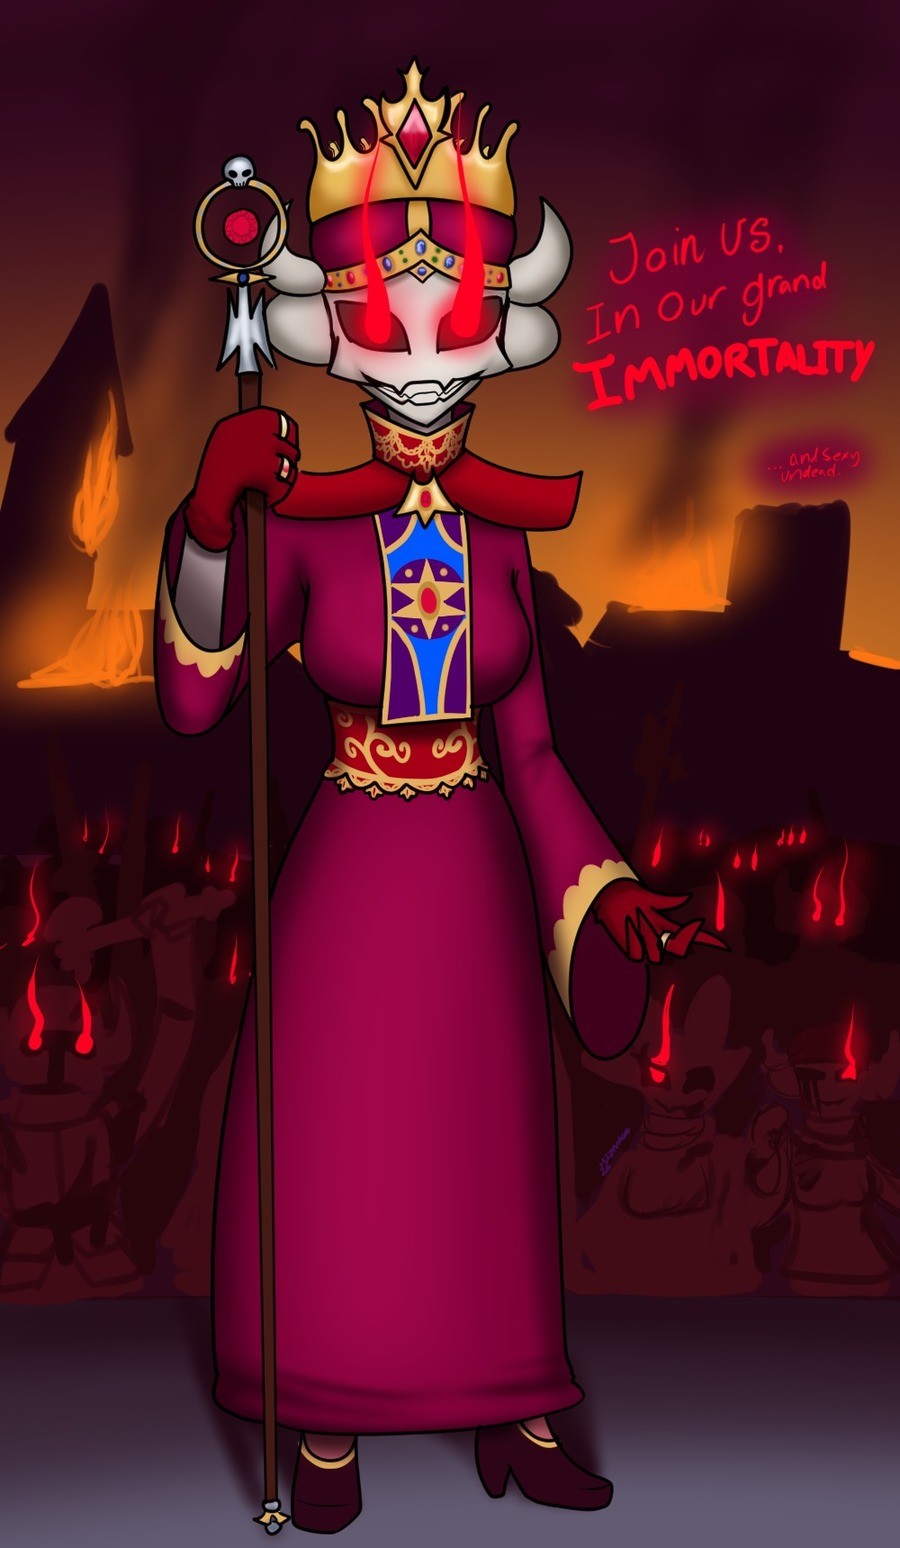 OC Art, Syra's undead army!. Lich queen Syra leads her growing and unstoppable undead army to conquer all of Literria. Granting everyone the gift of immortality